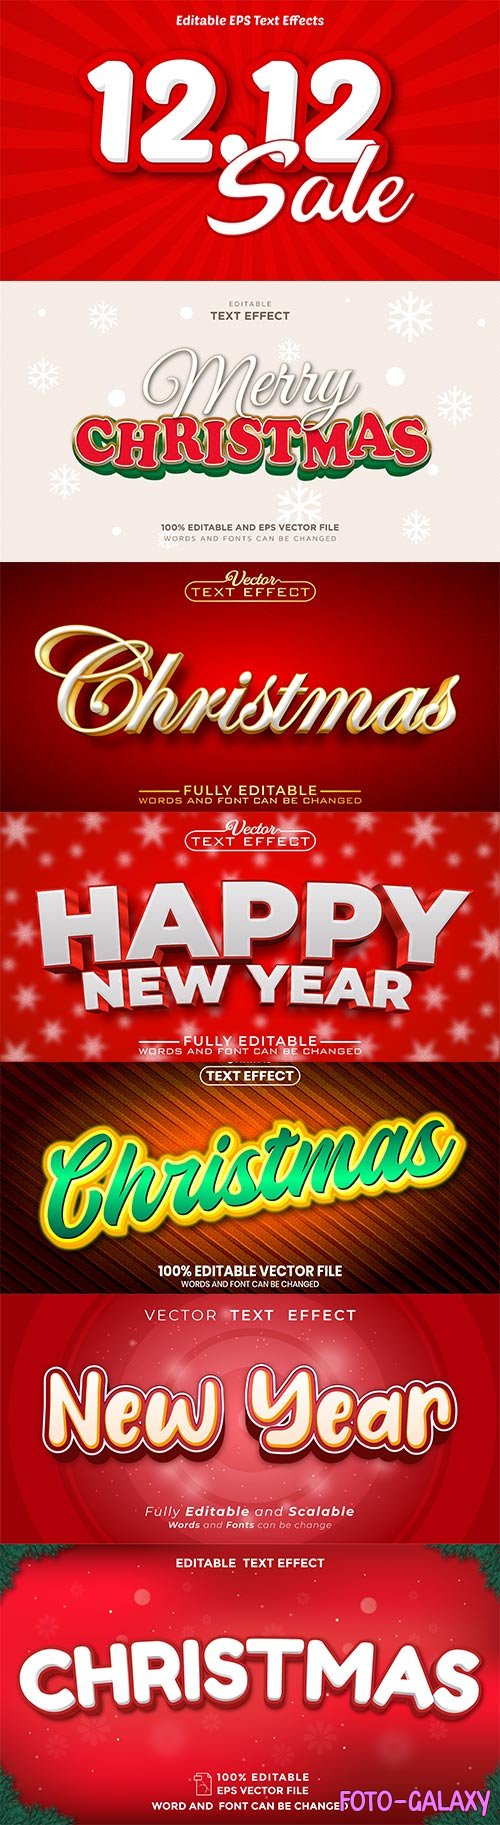 Christmas text font style editable, New year text vector effect